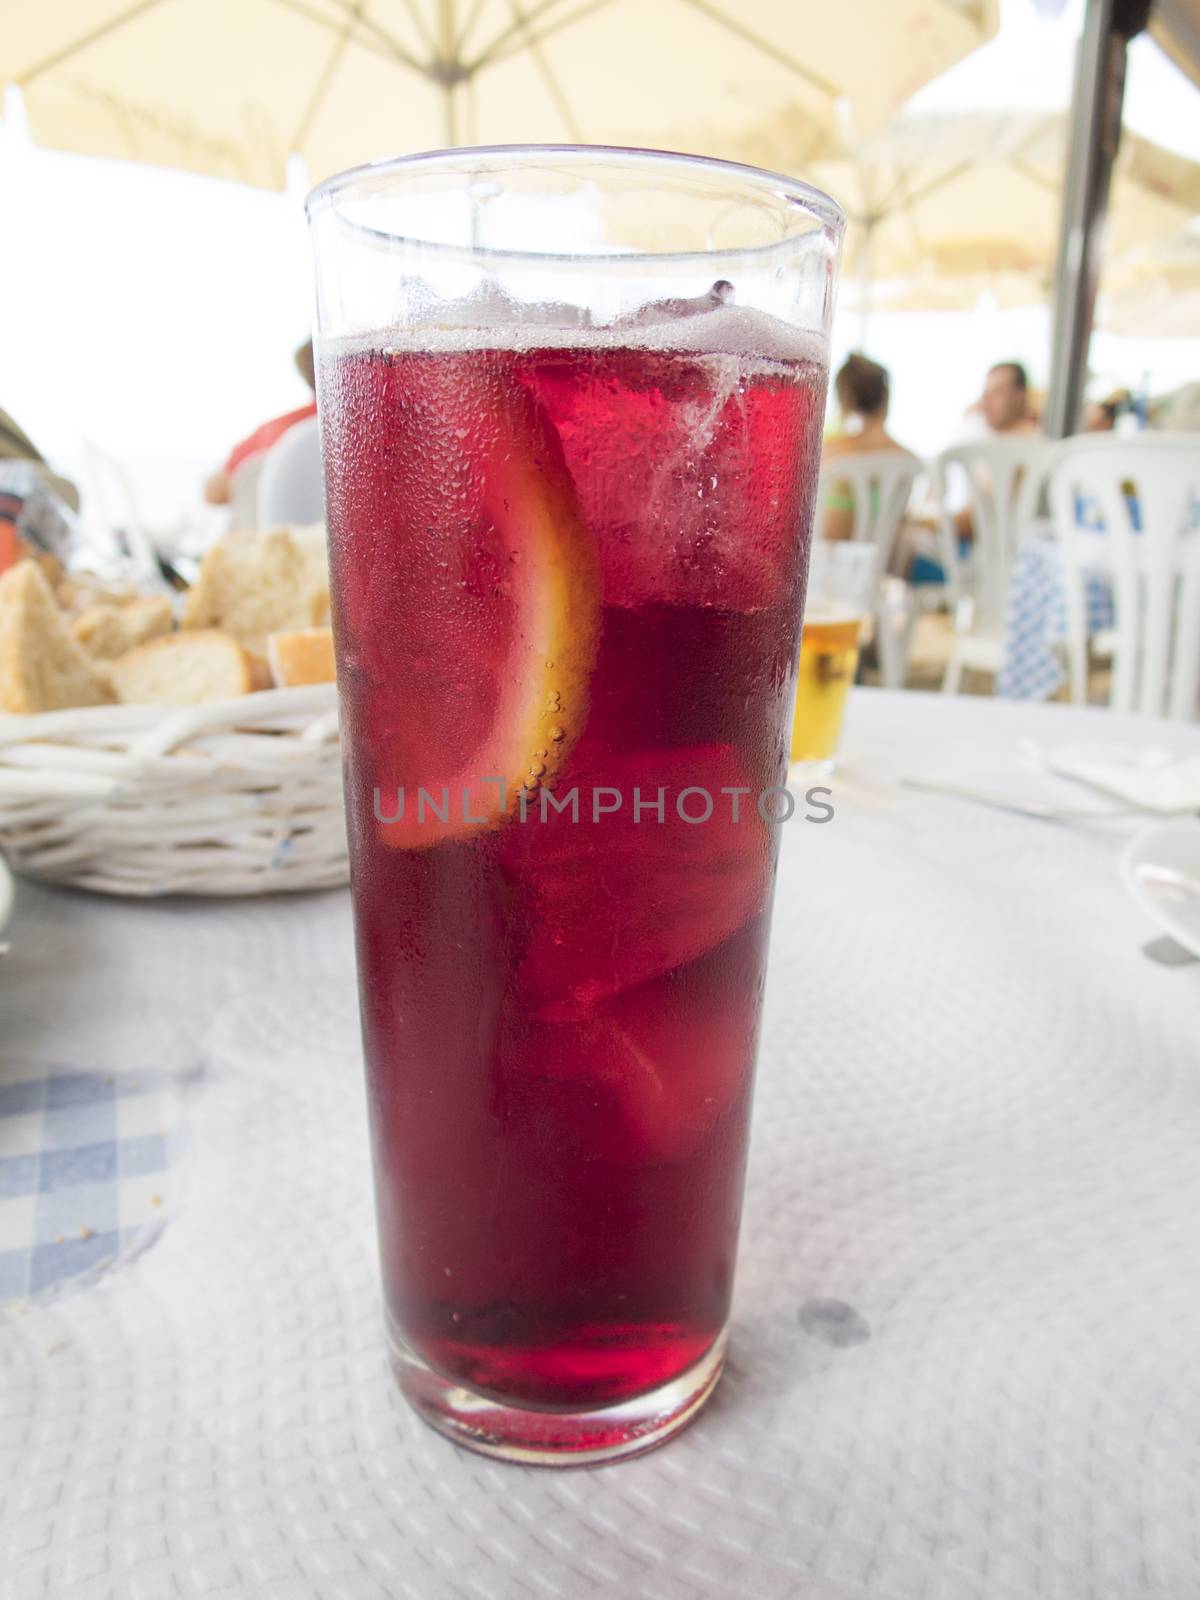 macro of crystal glass full of sangria typical spanish drink with slice lemon on white paper tablecloth restaurant